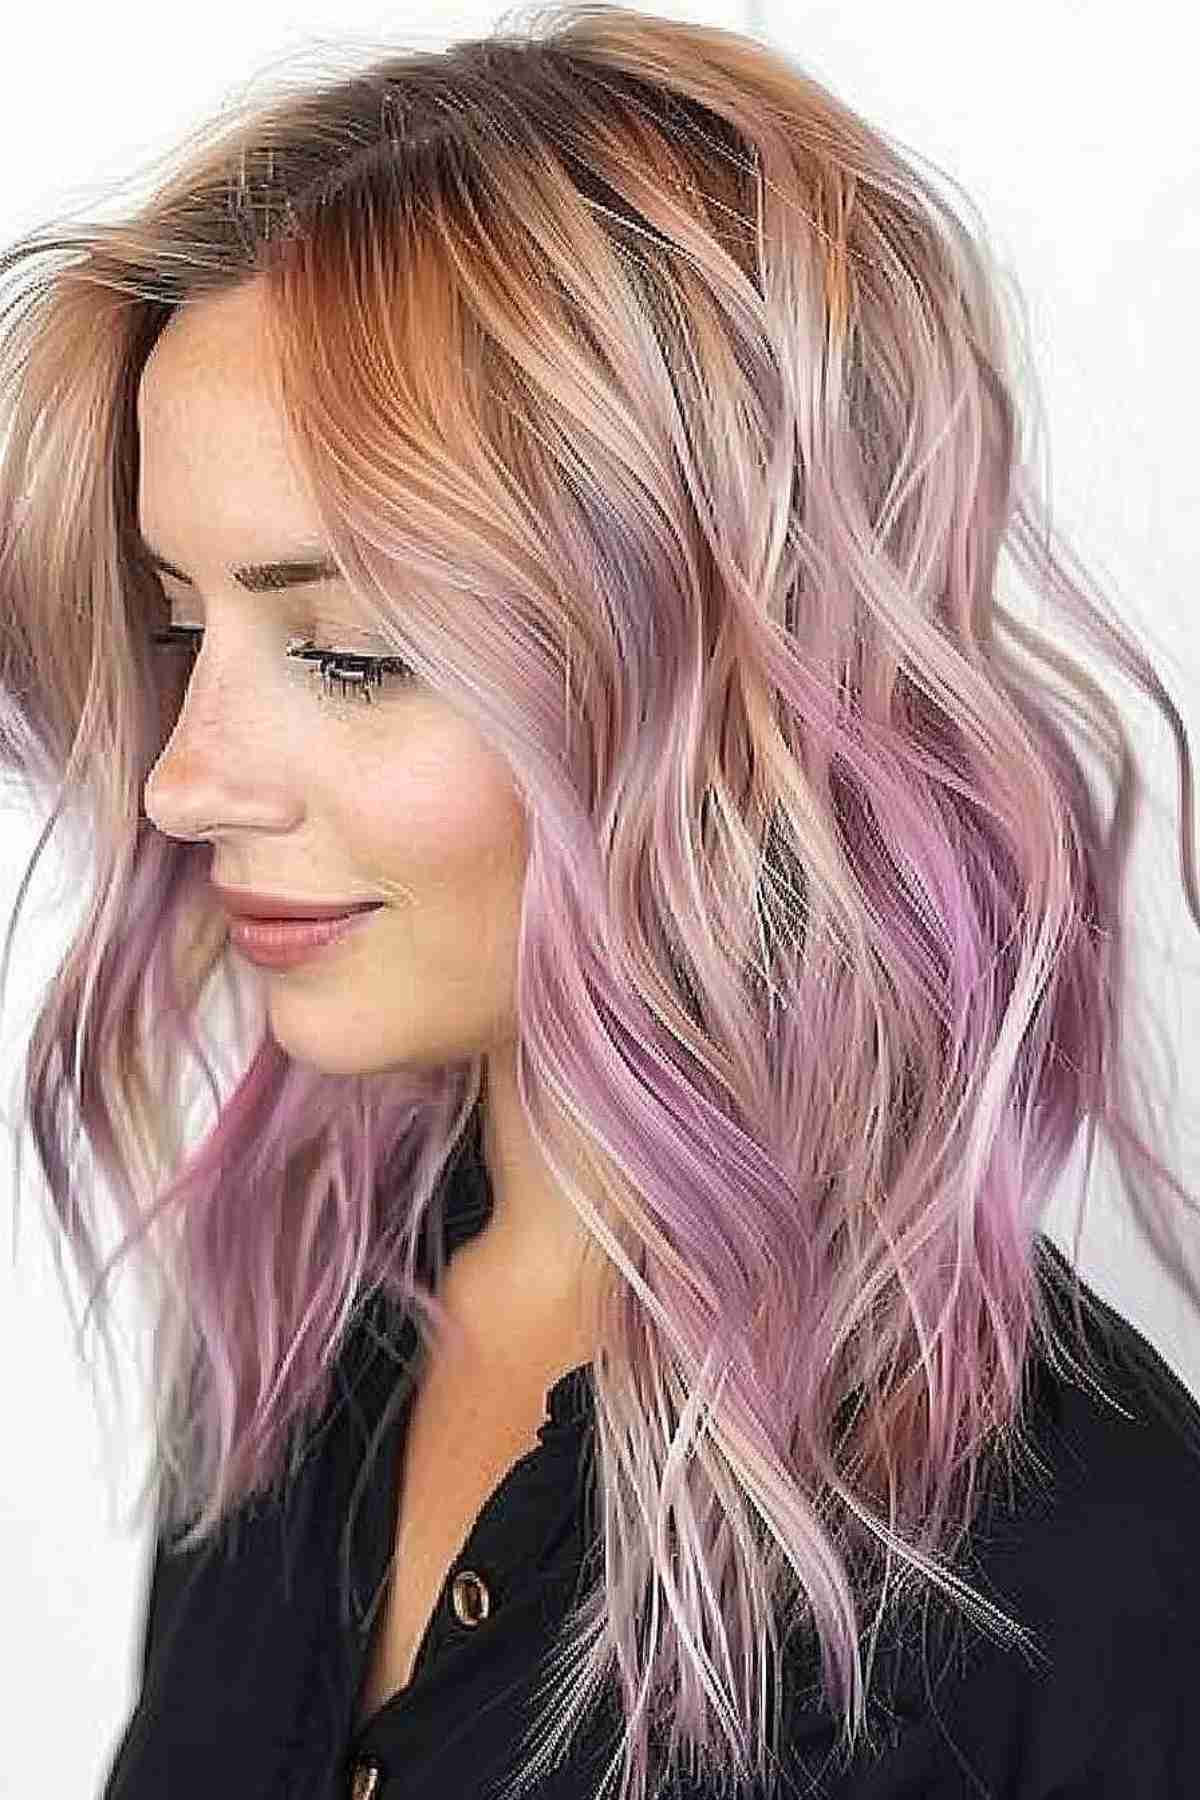 Medium-length wavy hair transitioning from rose pink roots to silver ends, demonstrating a modern balayage technique suitable for youthful and playful styles